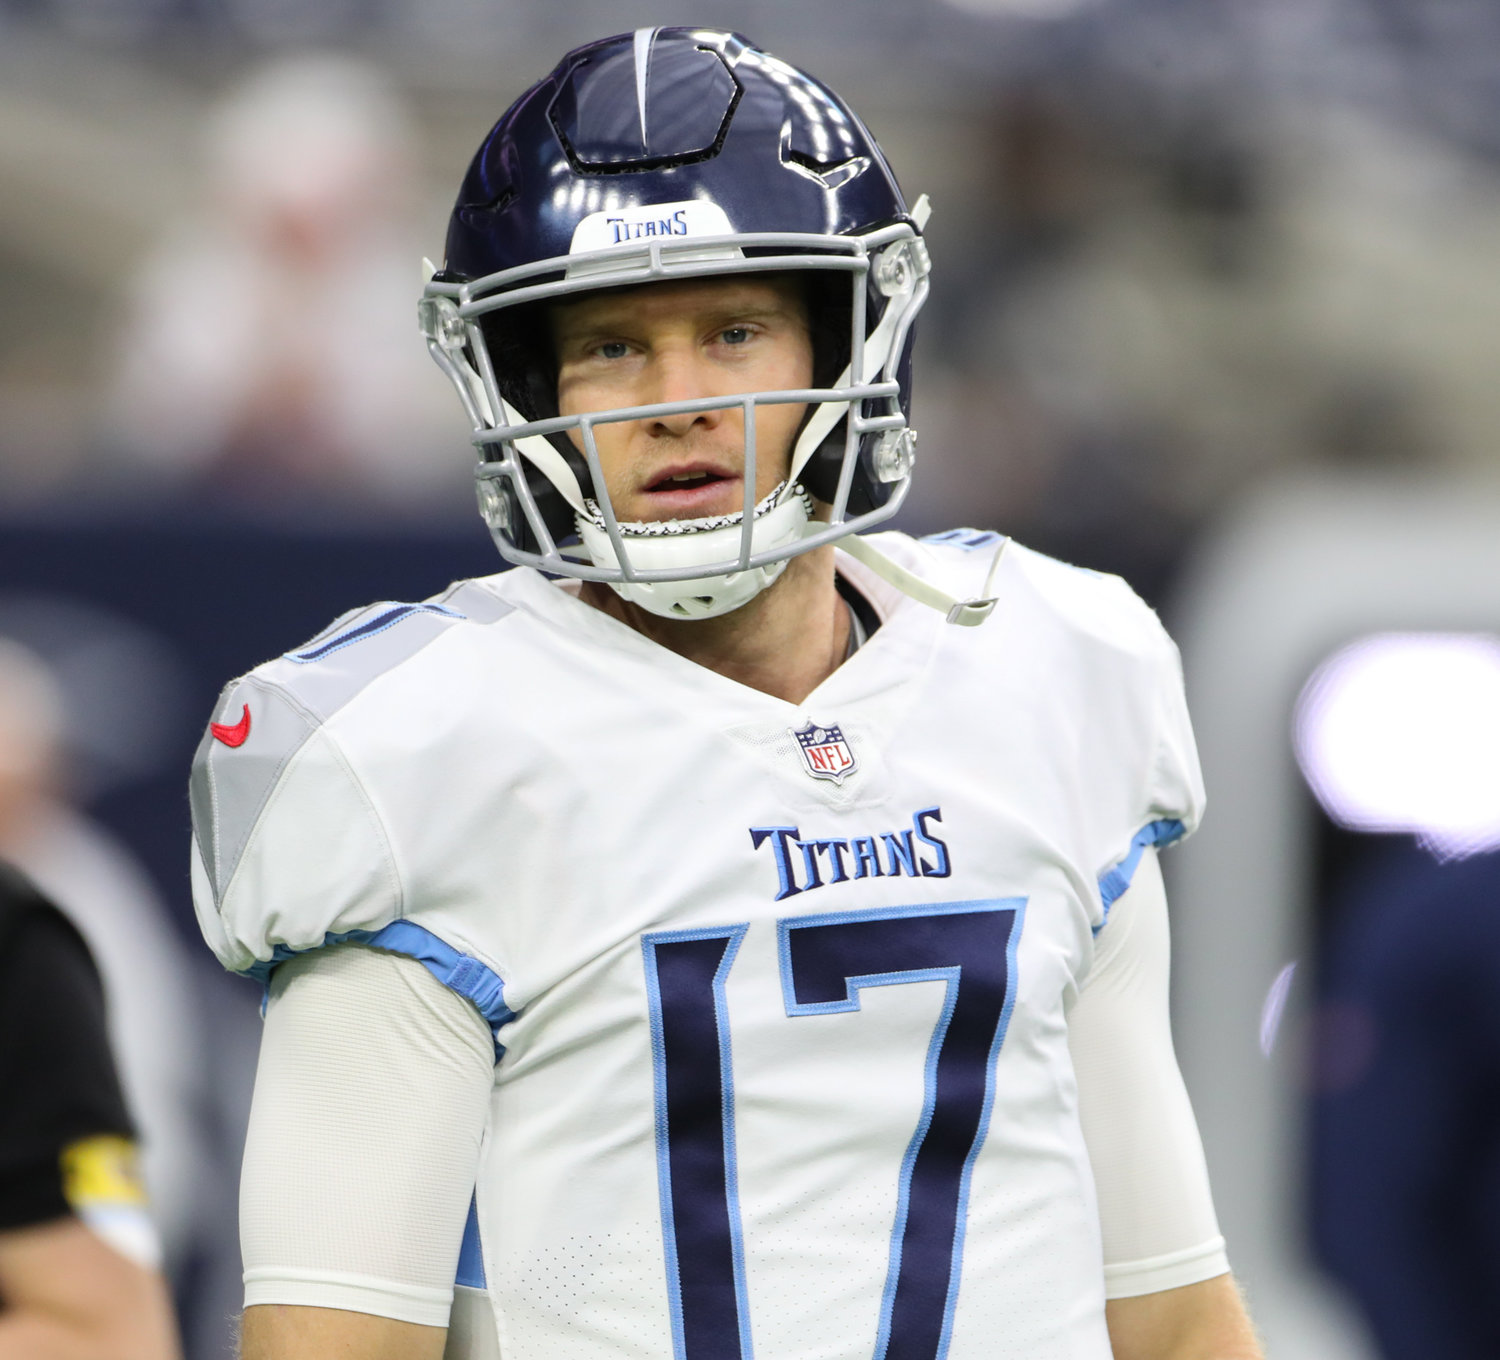 Tennessee Titans quarterback Ryan Tannehill (17) before the start of an NFL game between the Texans and the Titans on Jan. 9, 2022 in Houston, Texas.